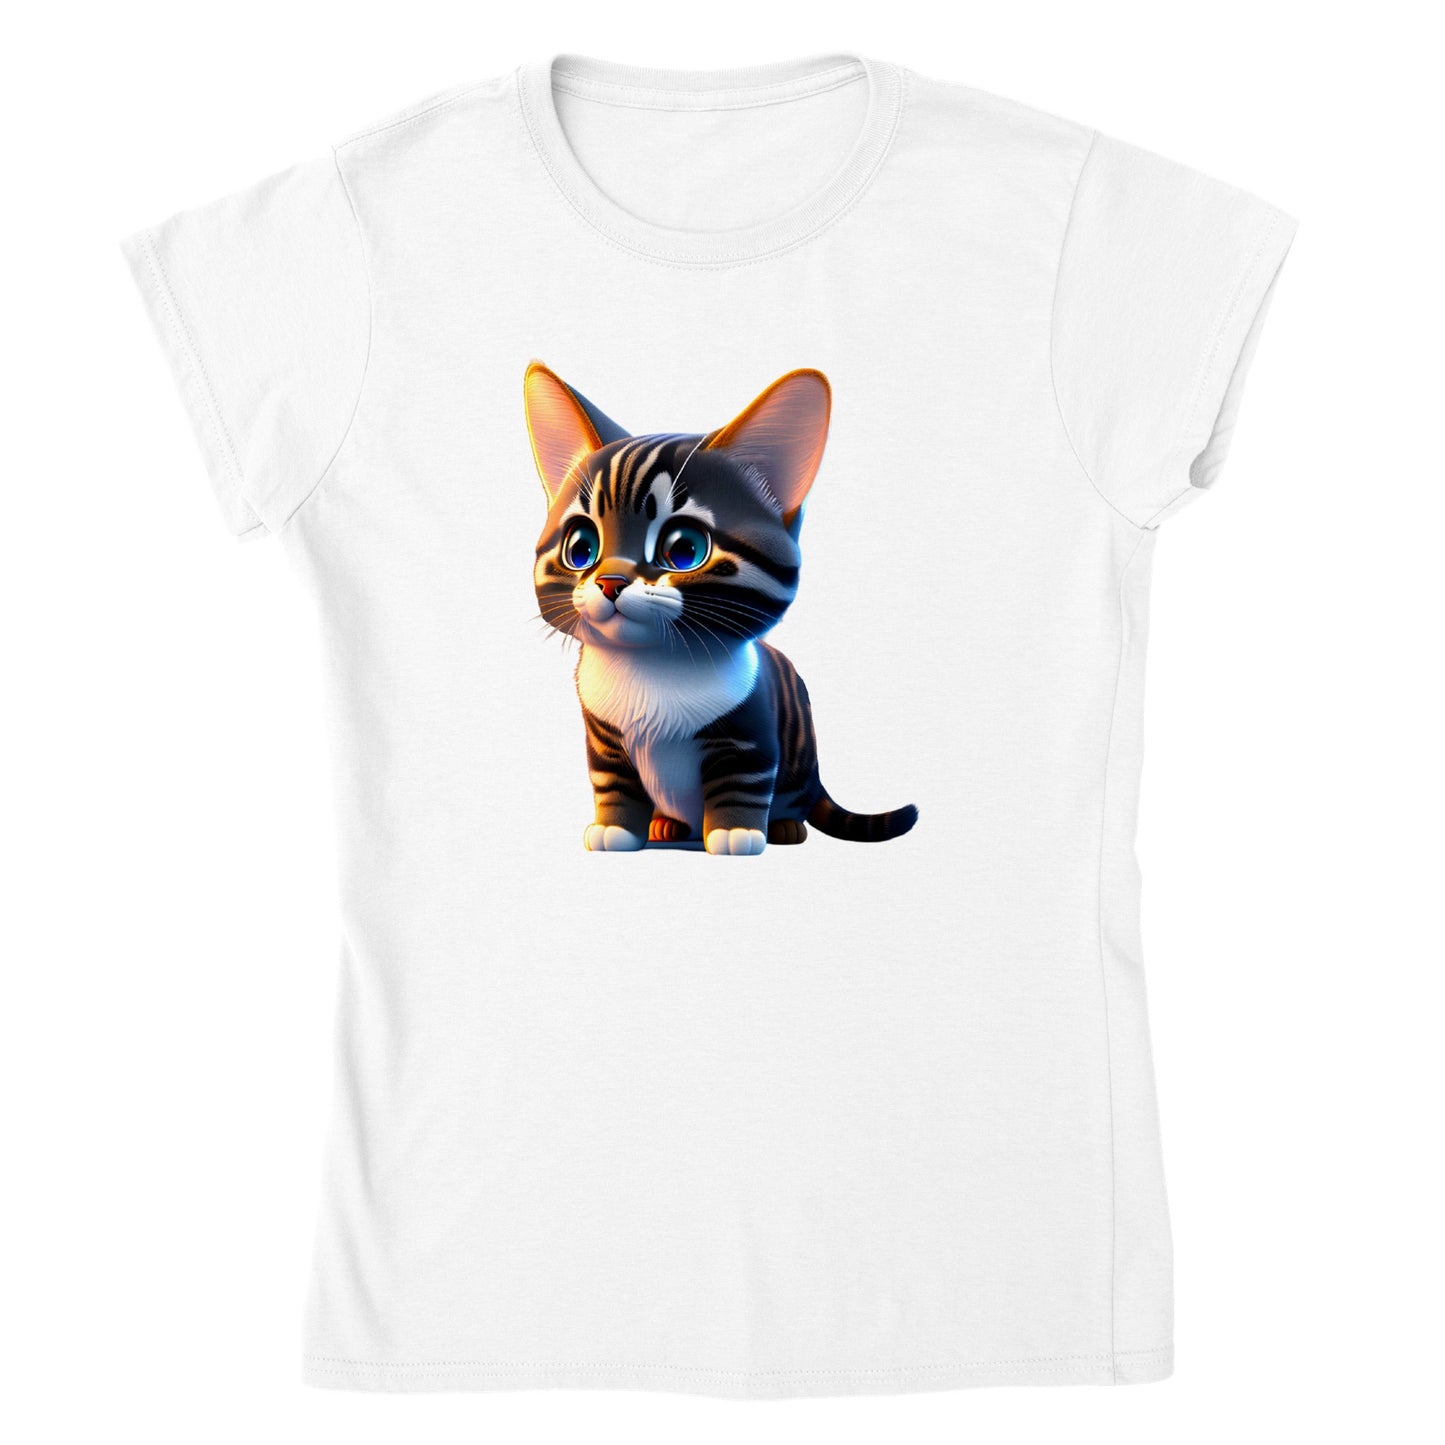 Adorable, Cool, Cute Cats and Kittens Toy - Classic Women’s Crewneck T-Shirt 35